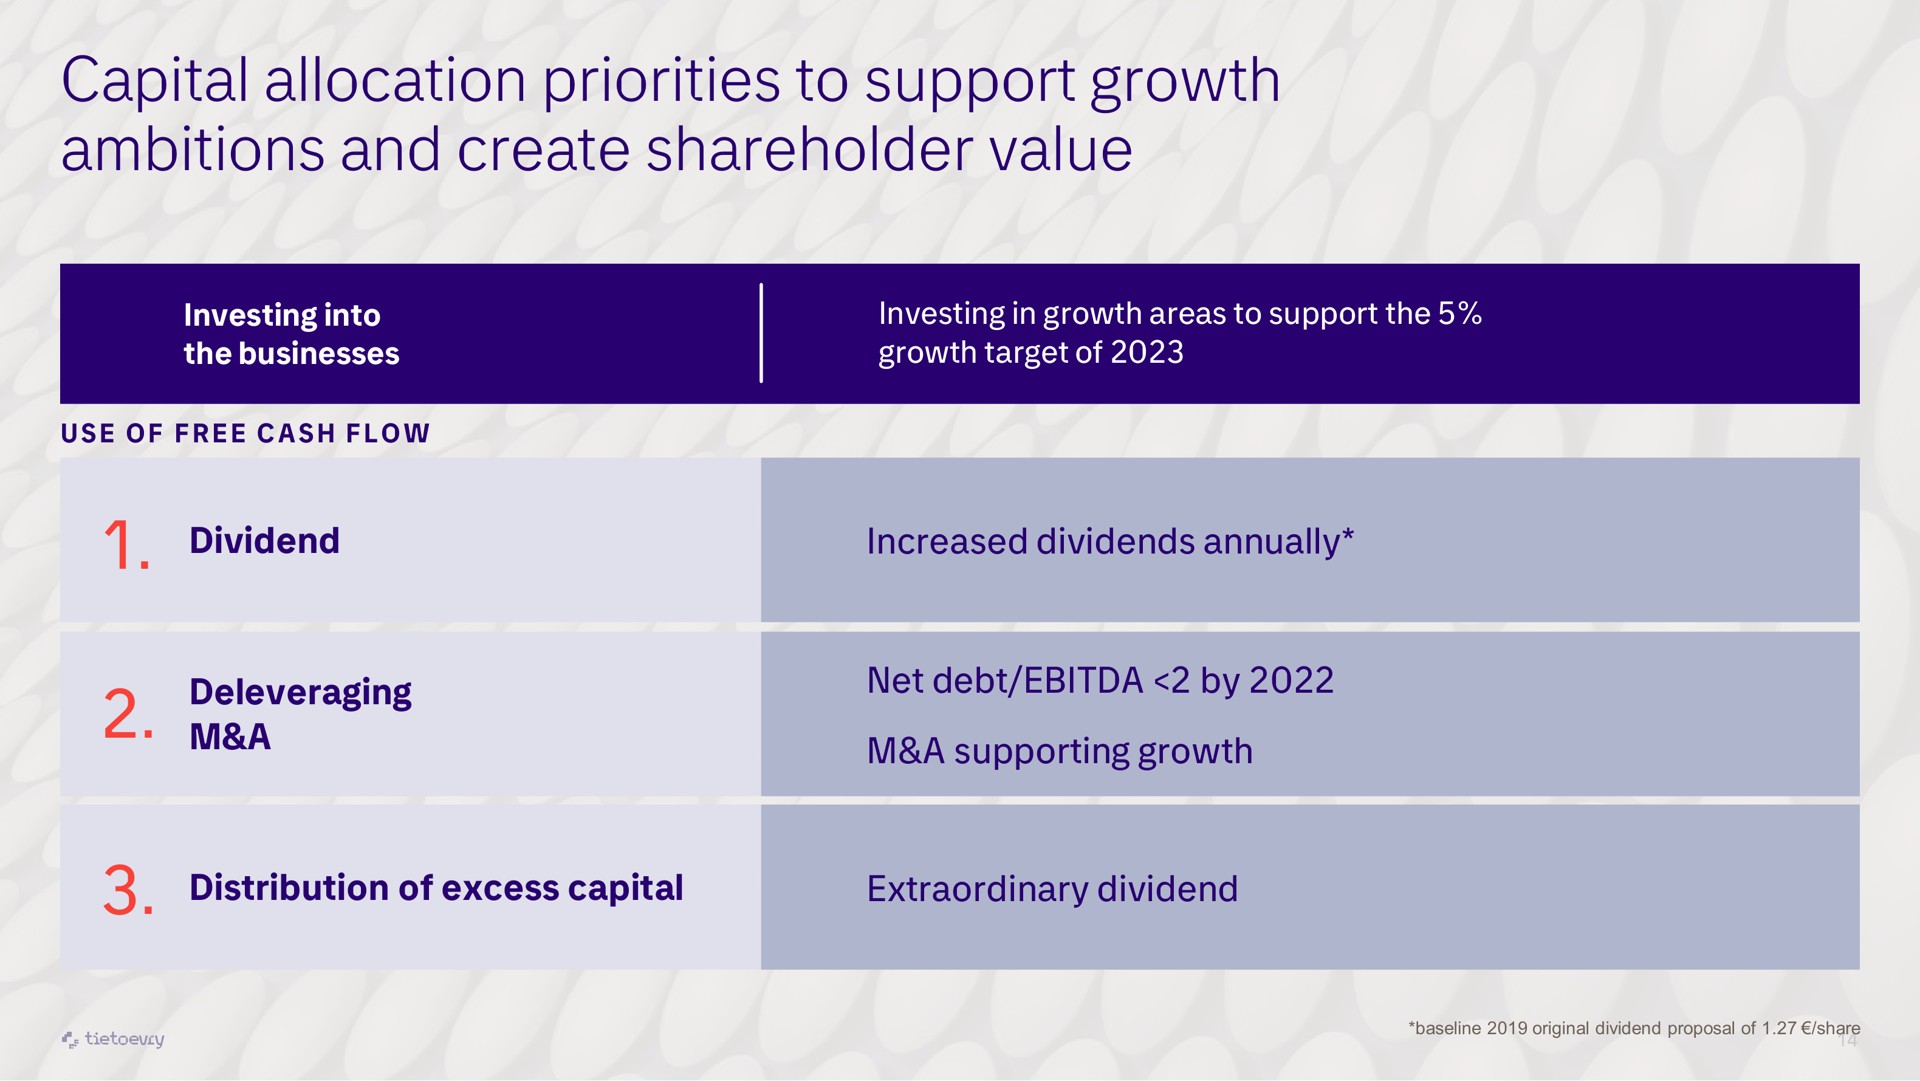 capital allocation priorities to support growth ambitions and create shareholder value | Tietoevry